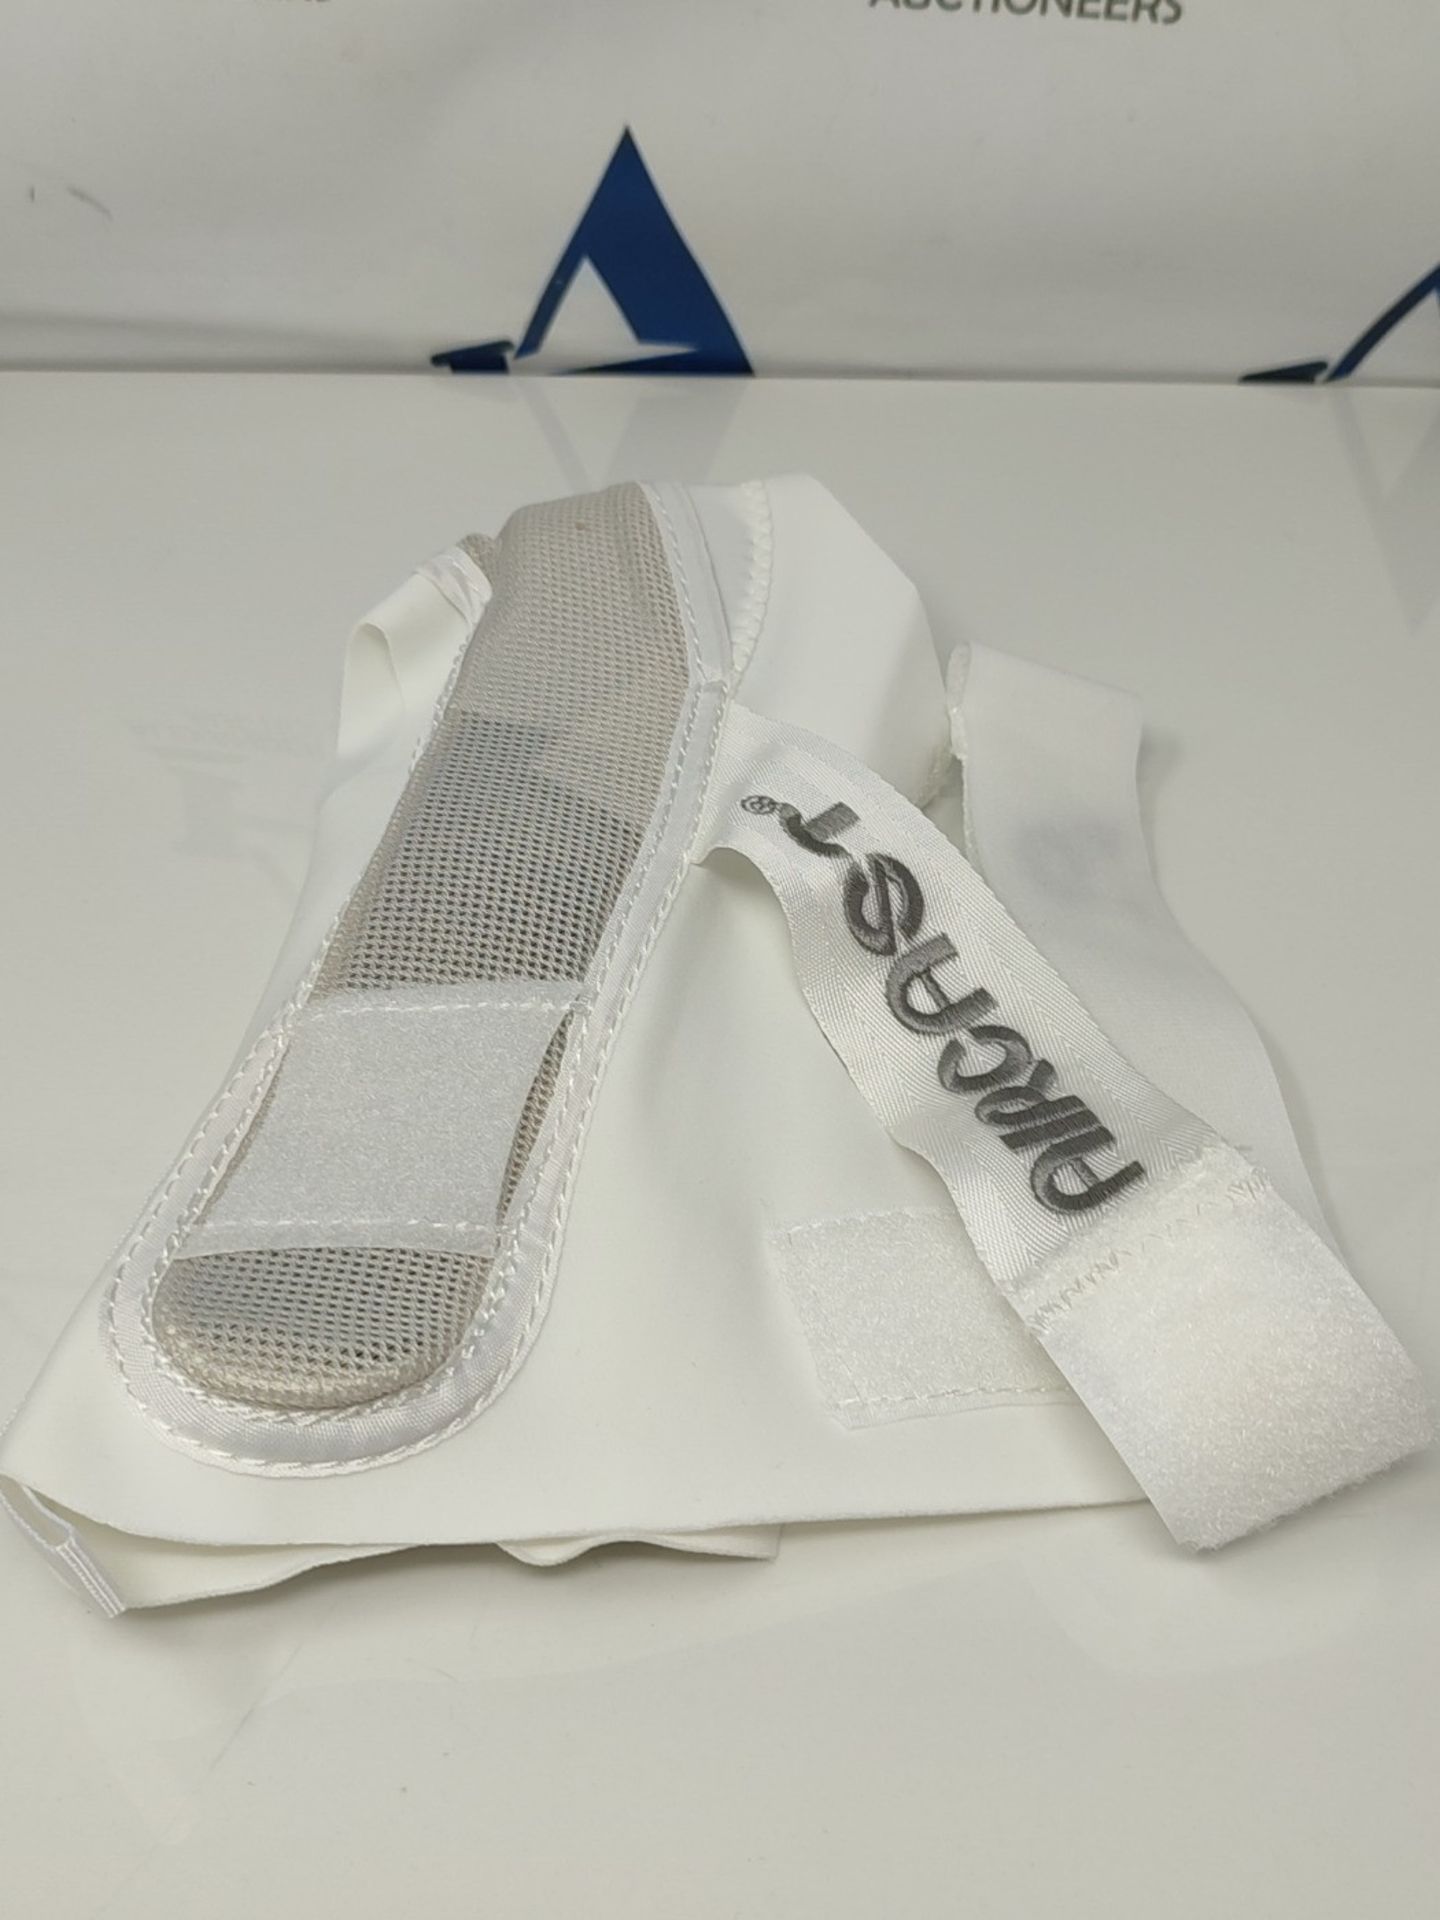 Aircast A60 Ankle Brace White Left Medium - Image 2 of 3